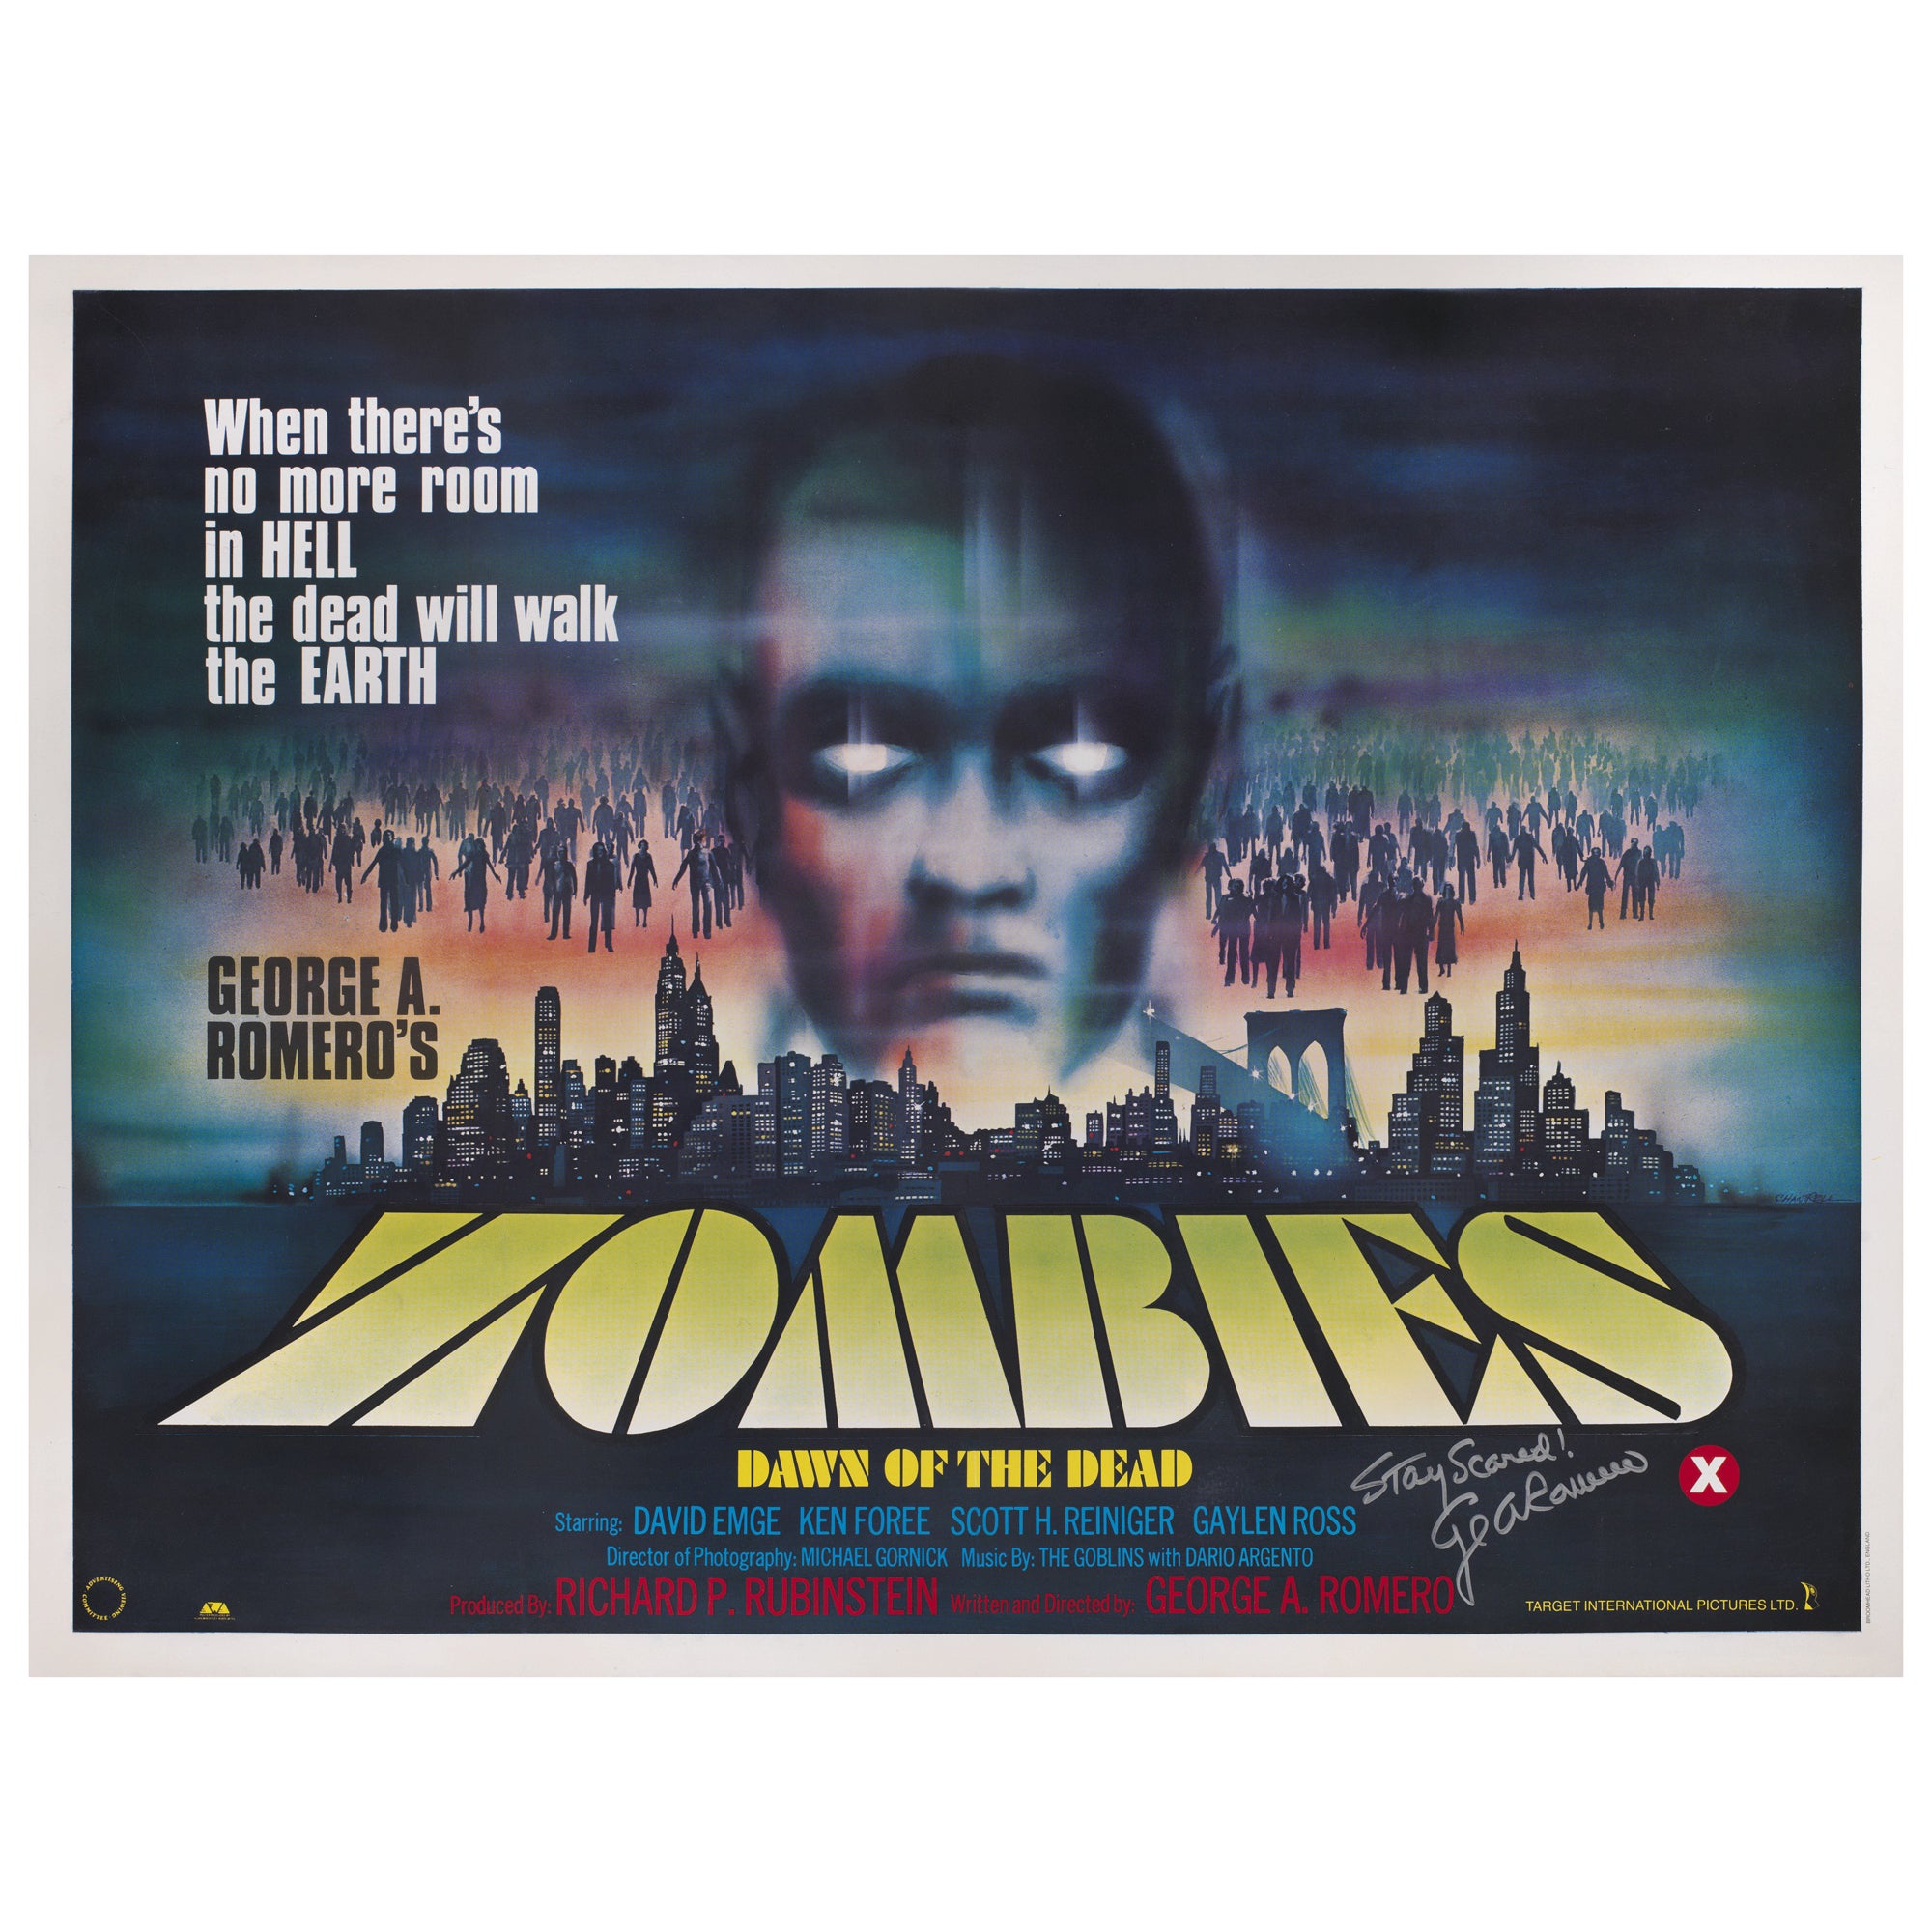 Dawn of the Dead / Zombies Dawn of the Dead (Dord du mort)